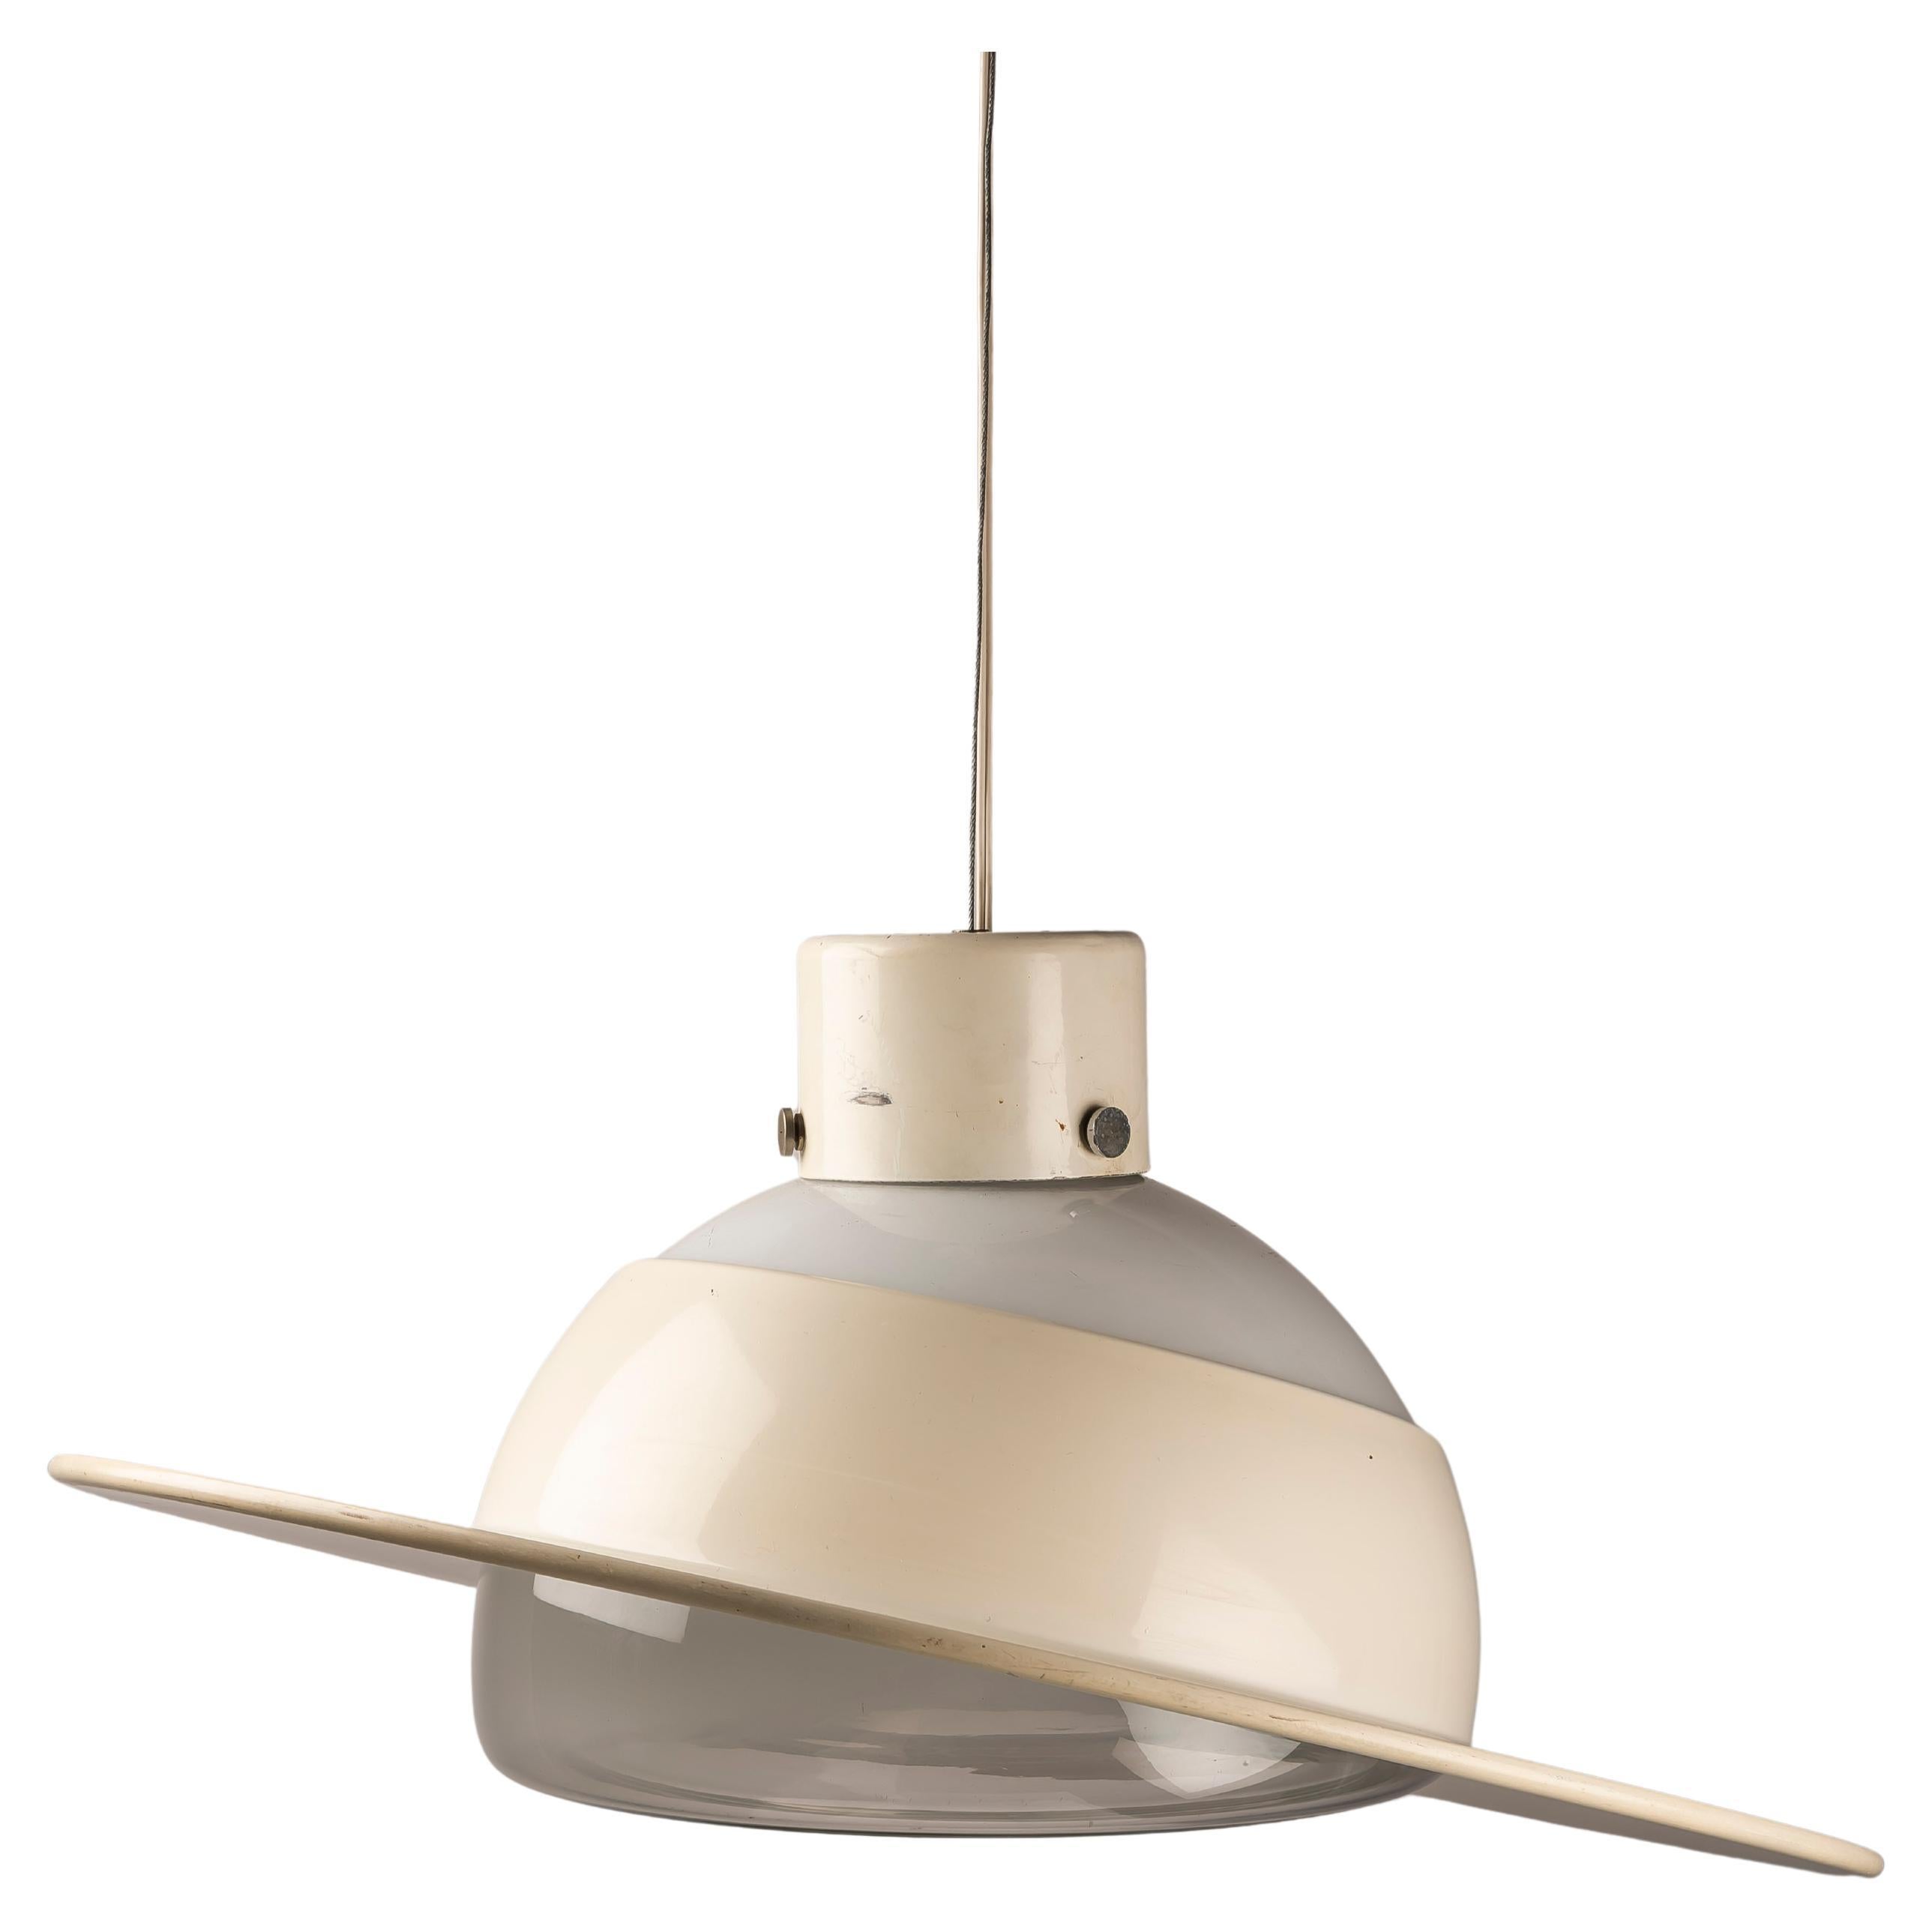 A Saturn metal and Murano glass Space age Italian pendant lamp